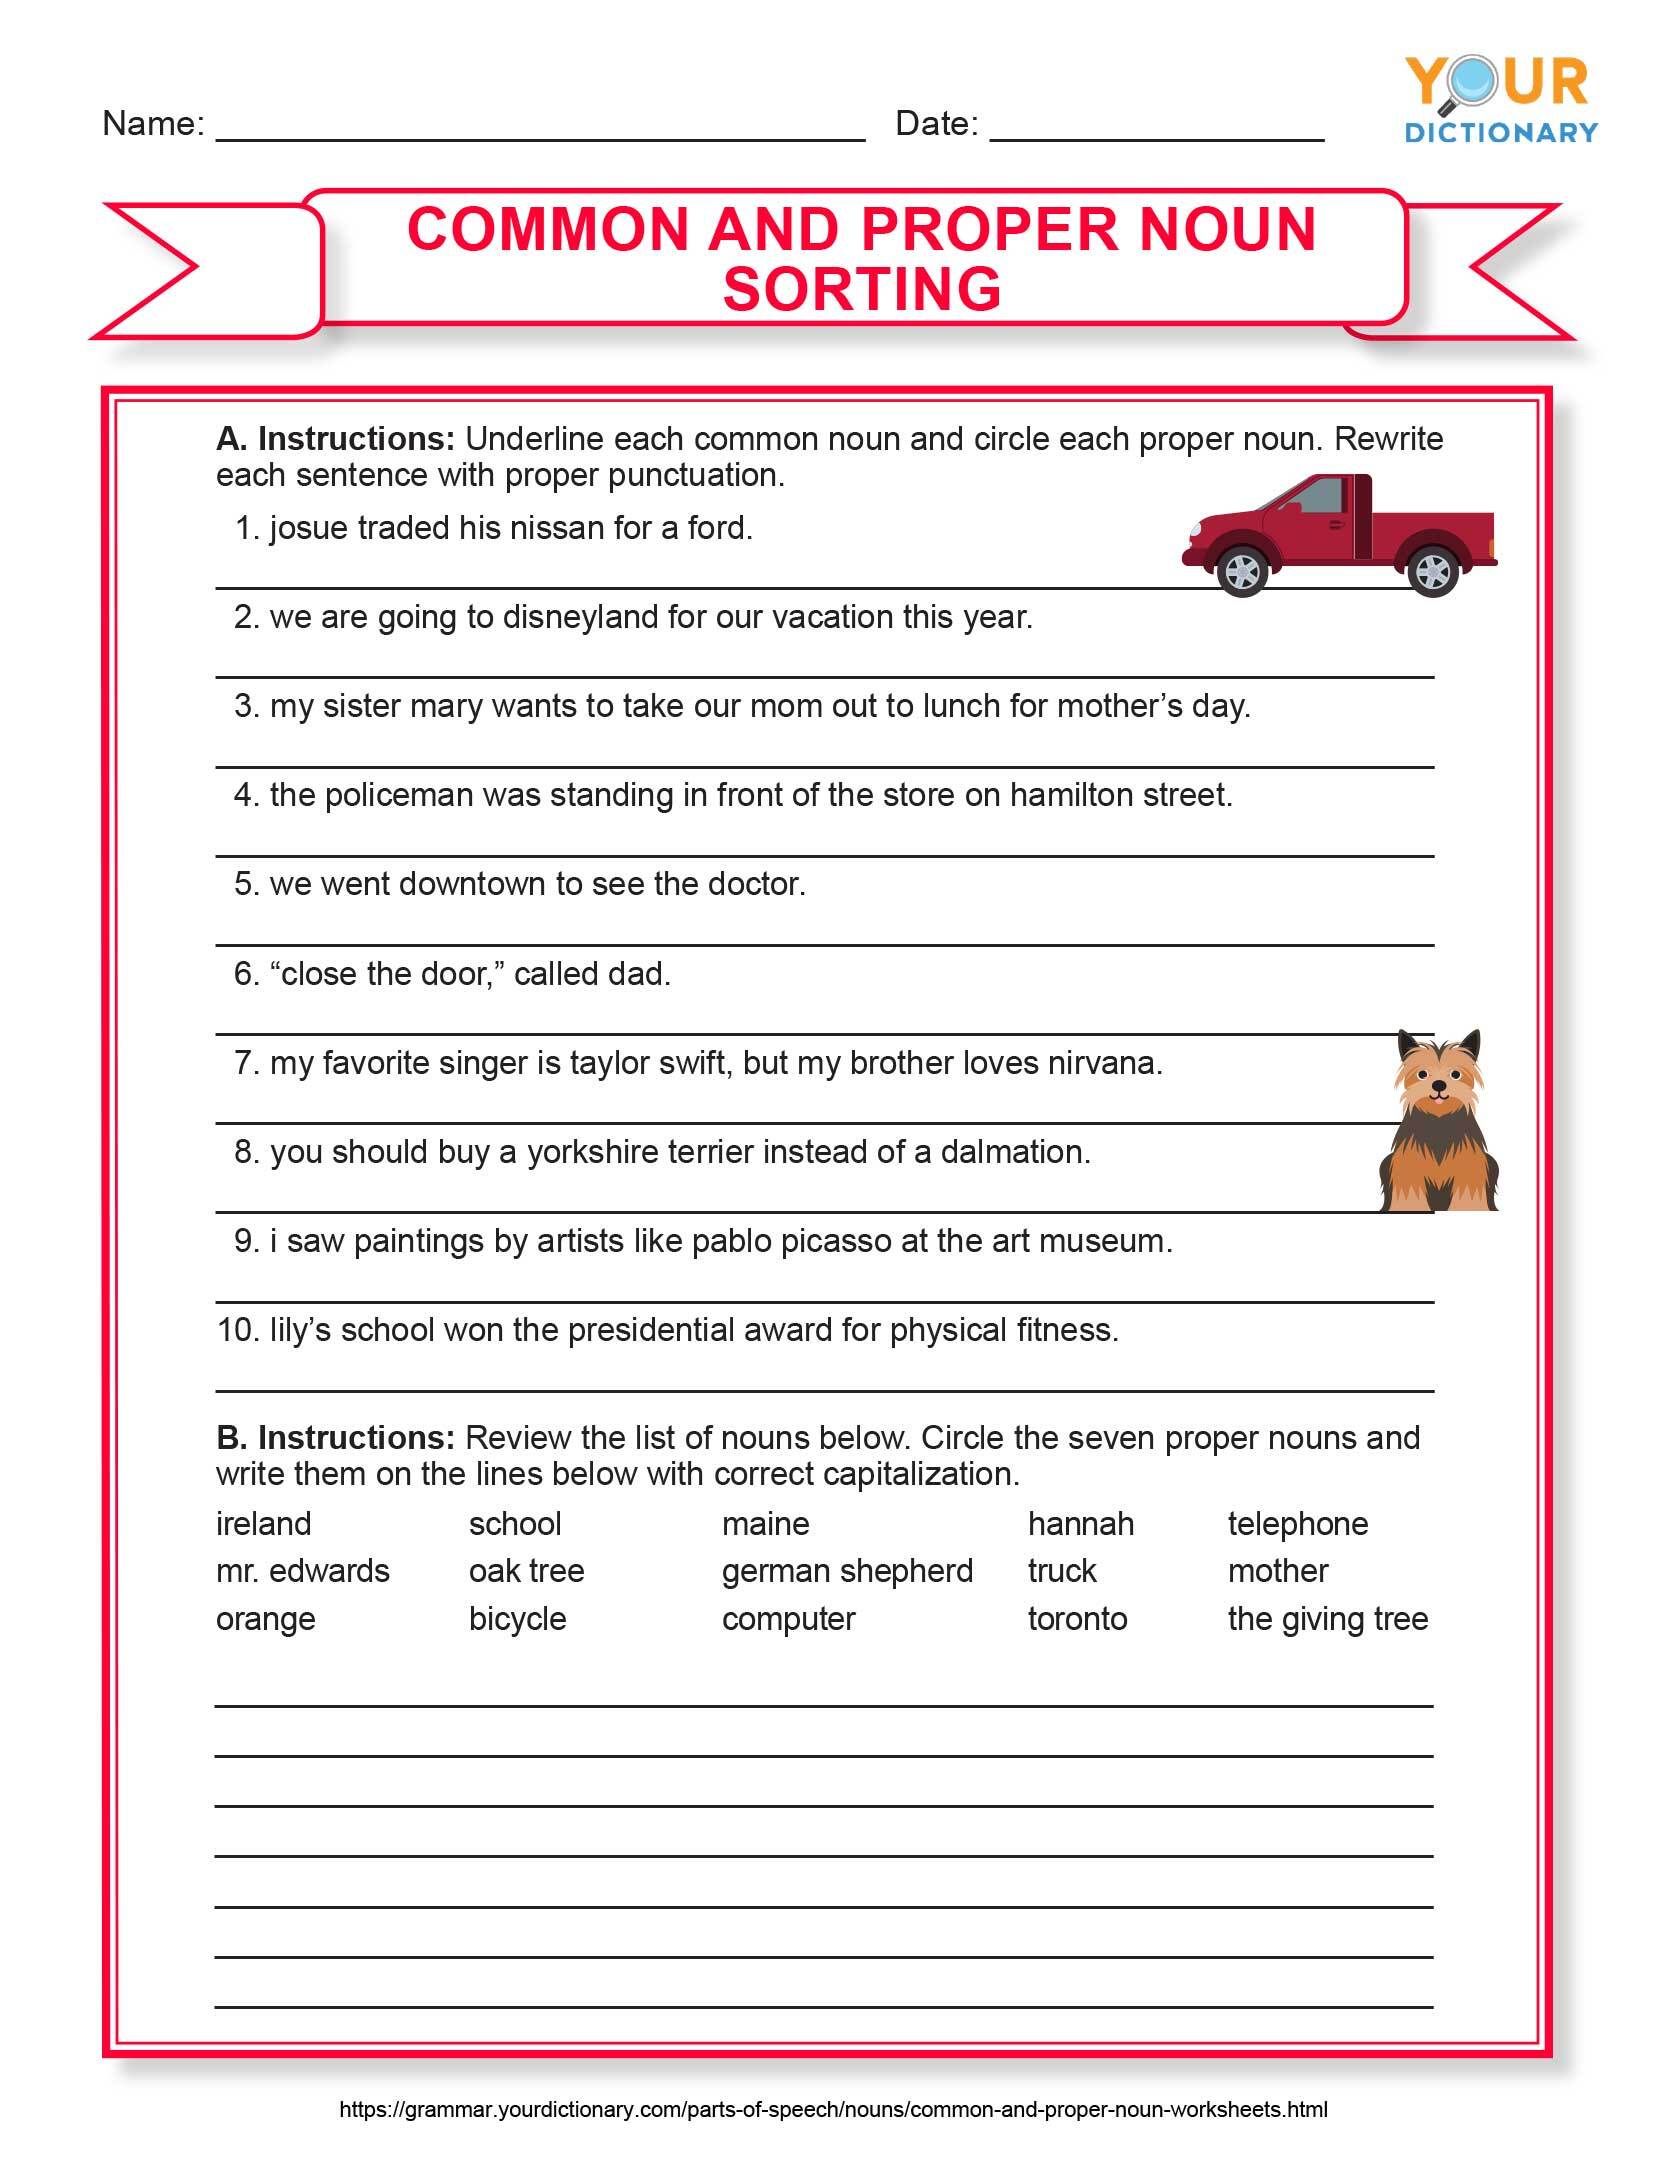 Common Noun And Proper Noun Worksheet For Class With Answers Common 